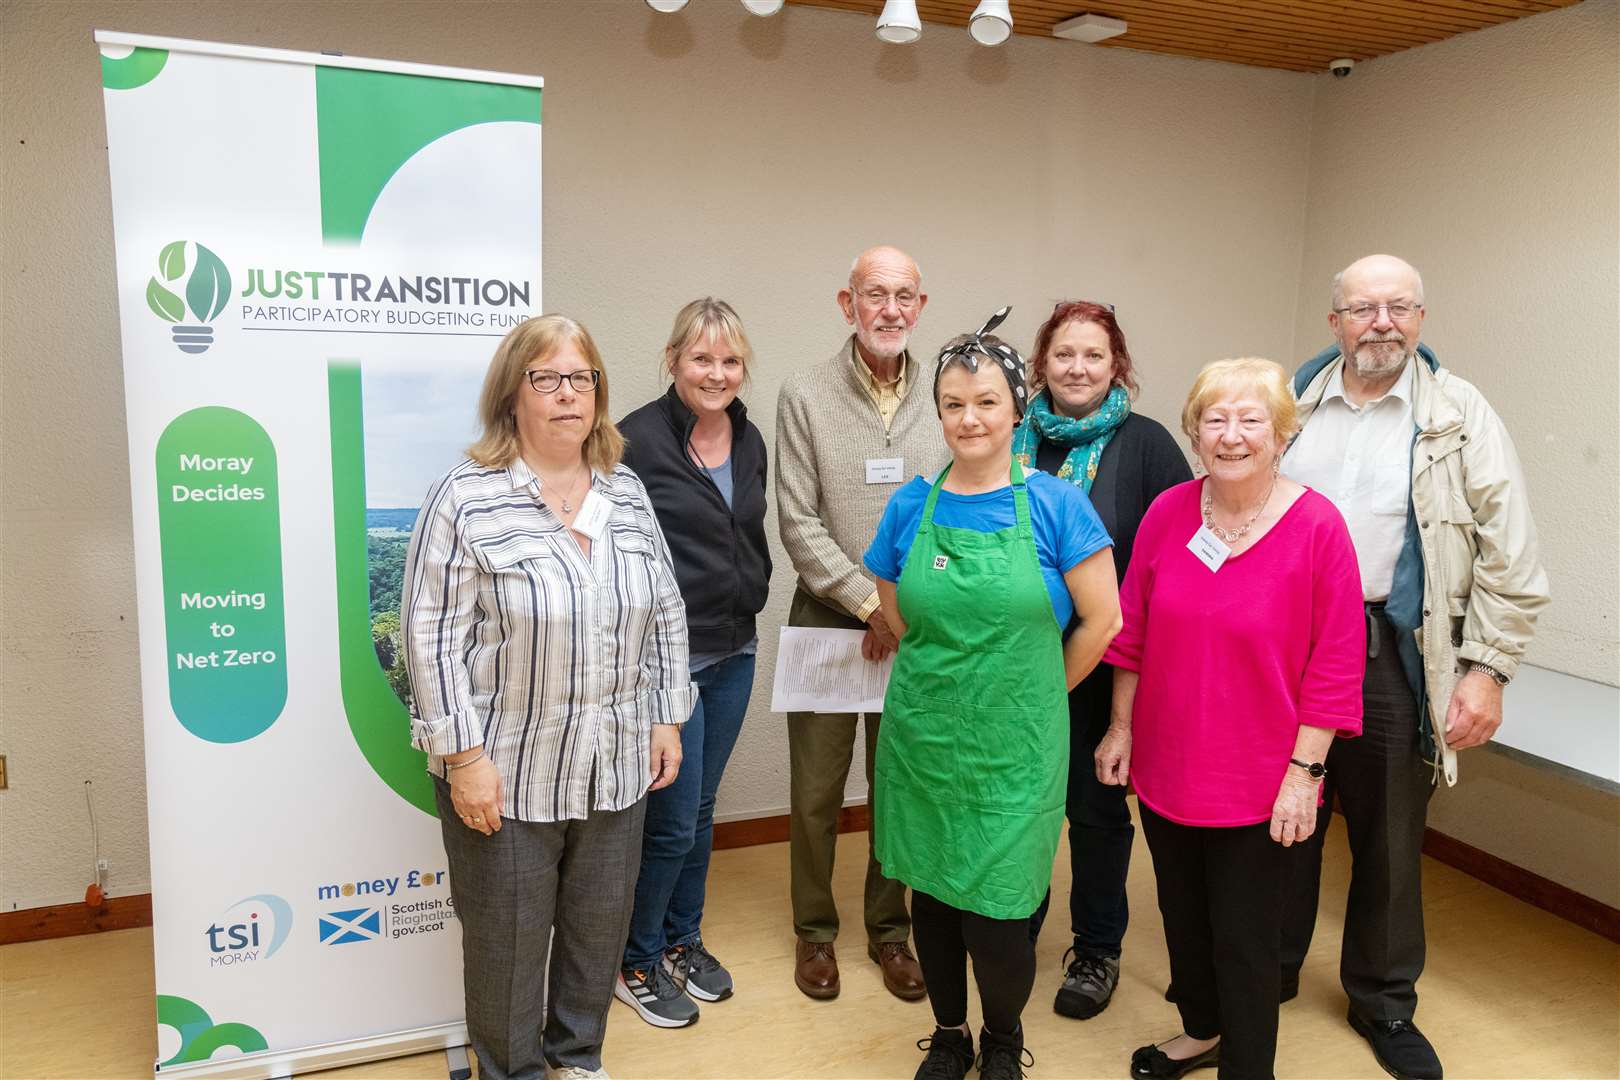 Jackie Maclaren (tsiMoray), Louise Nicol (tsiMoray), Les Morgan (Money for Moray), Anna Henderson (Forres House Garden Project), Rose Toney (NESCAN Hub), Sandra Maclennan (tsiMoray) and David Parker (Forres Men's Shed) at the Just Transition Participatory Budgeting Roadshow at Forres House Community Centre in July.